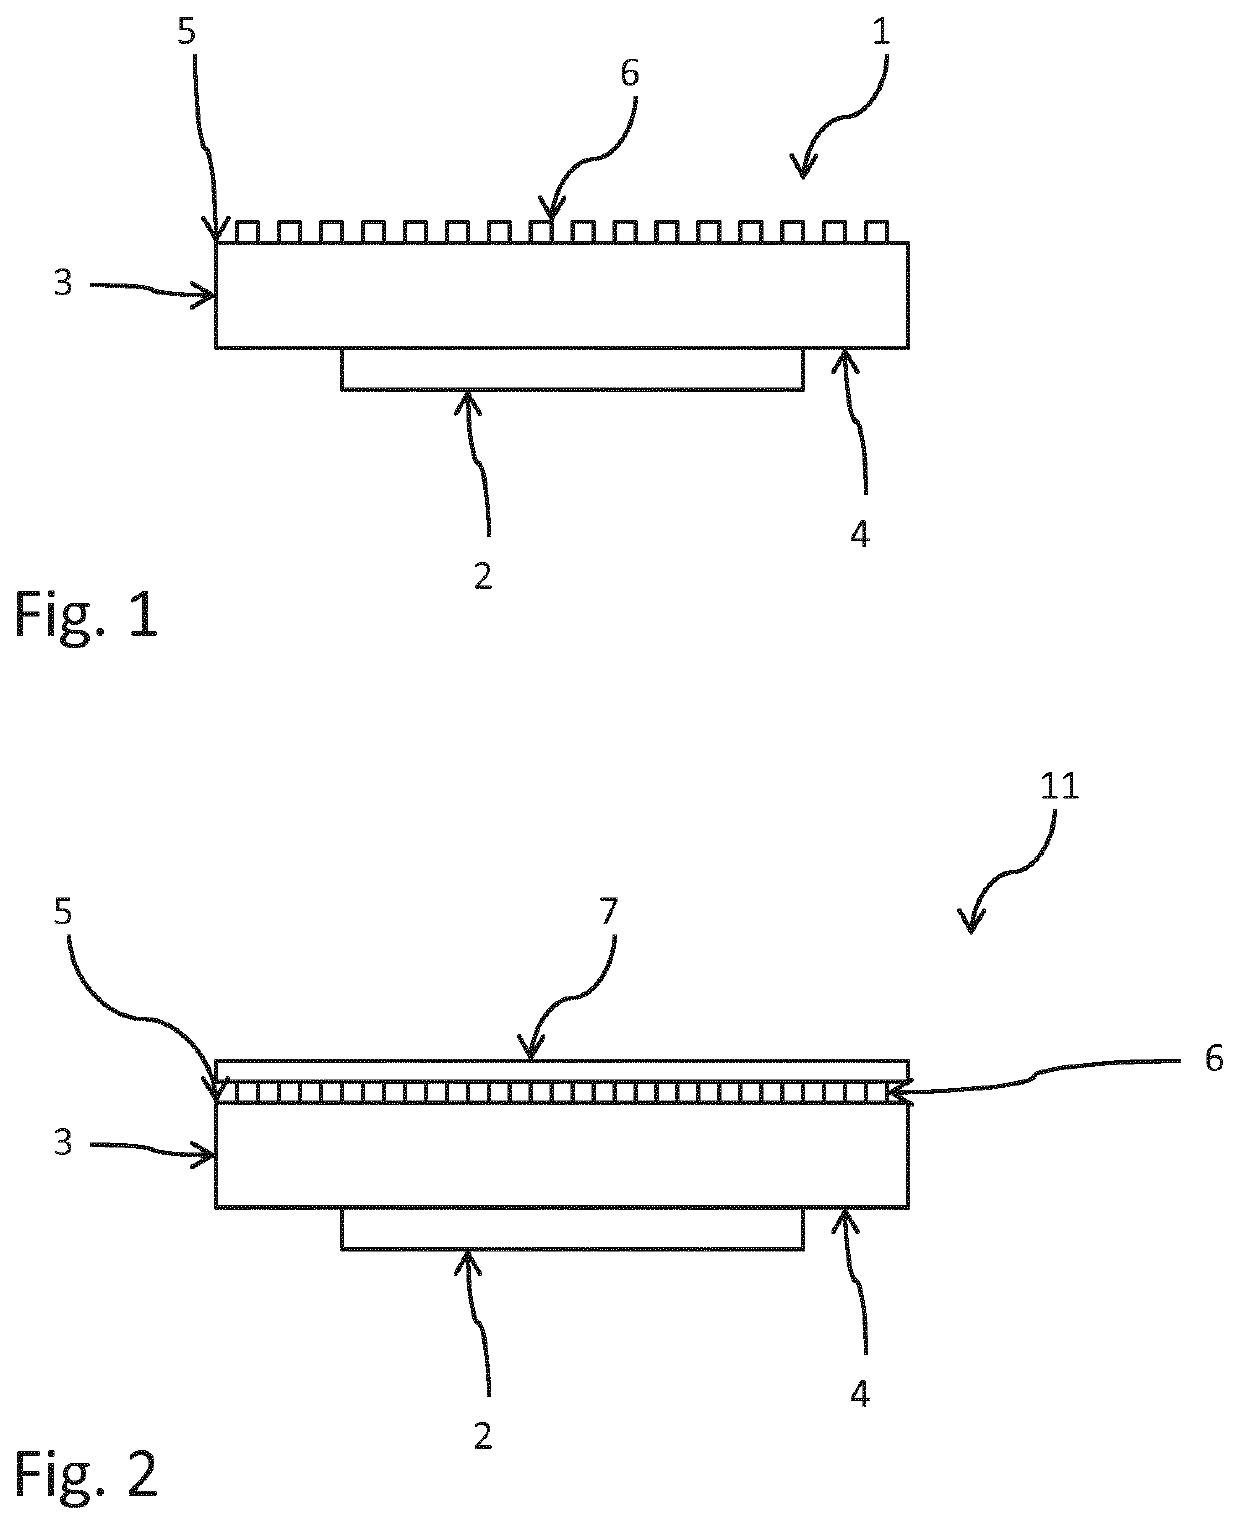 Light converting device having a wavelength converting layer with a hydrophobic nanostructure